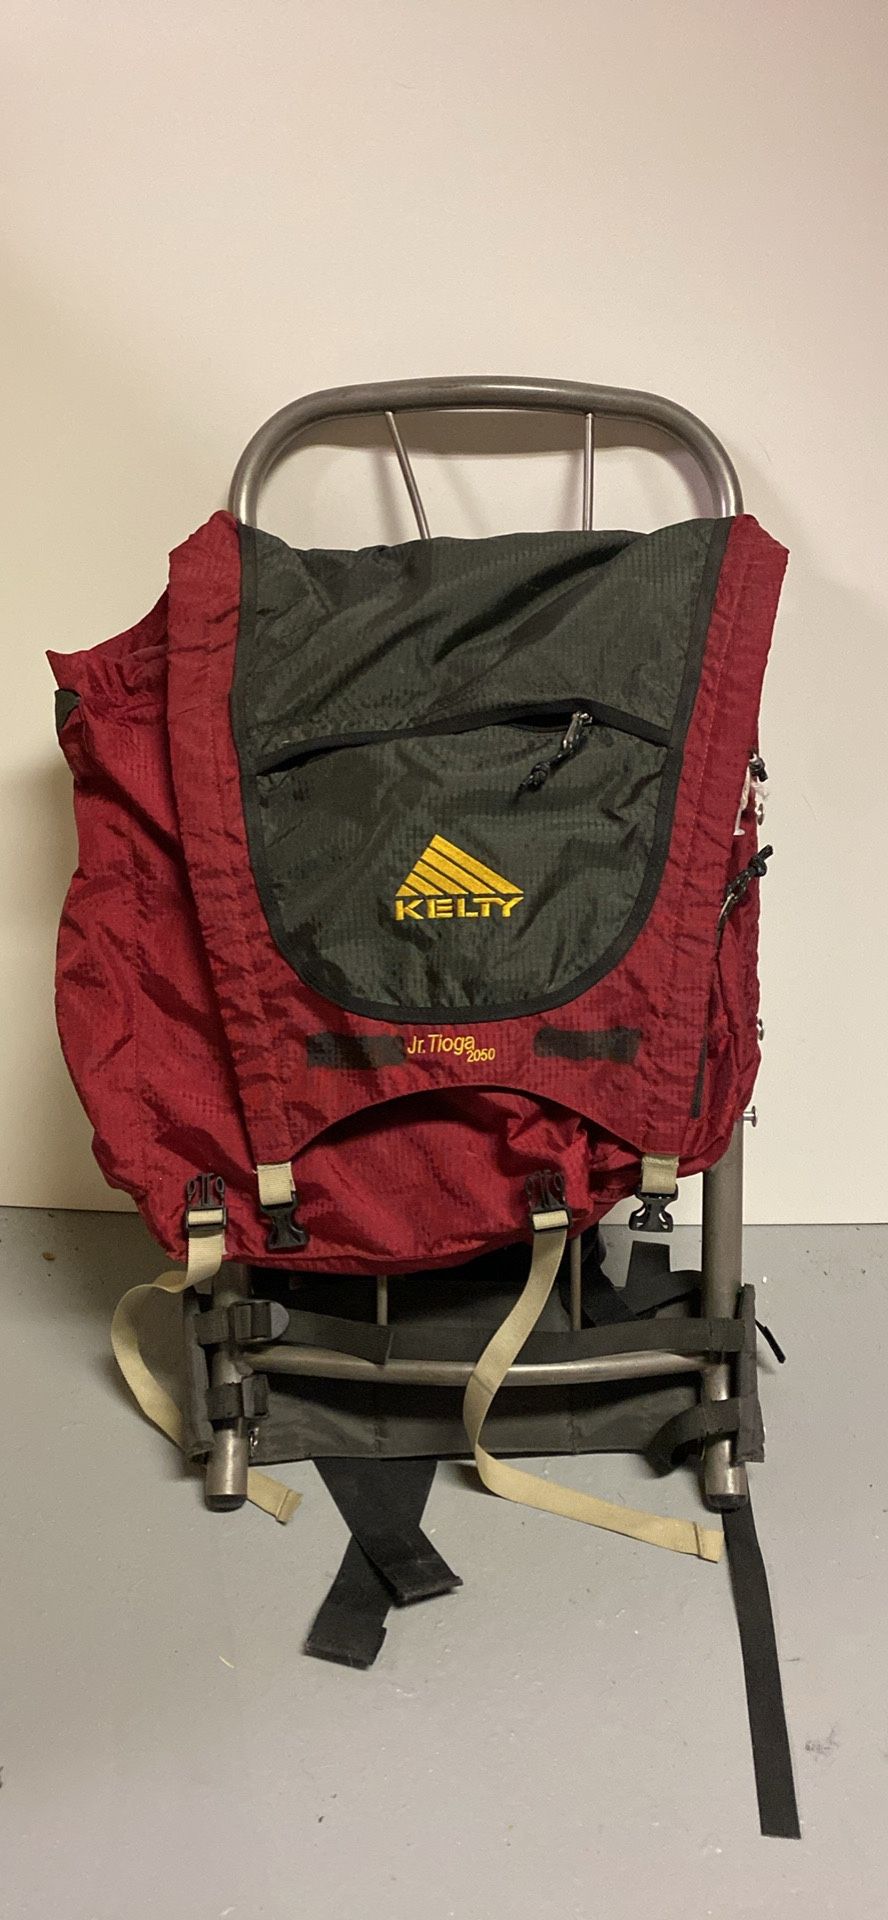 Kelty Youth Jr. Tioga 2050 Hiking Backpack